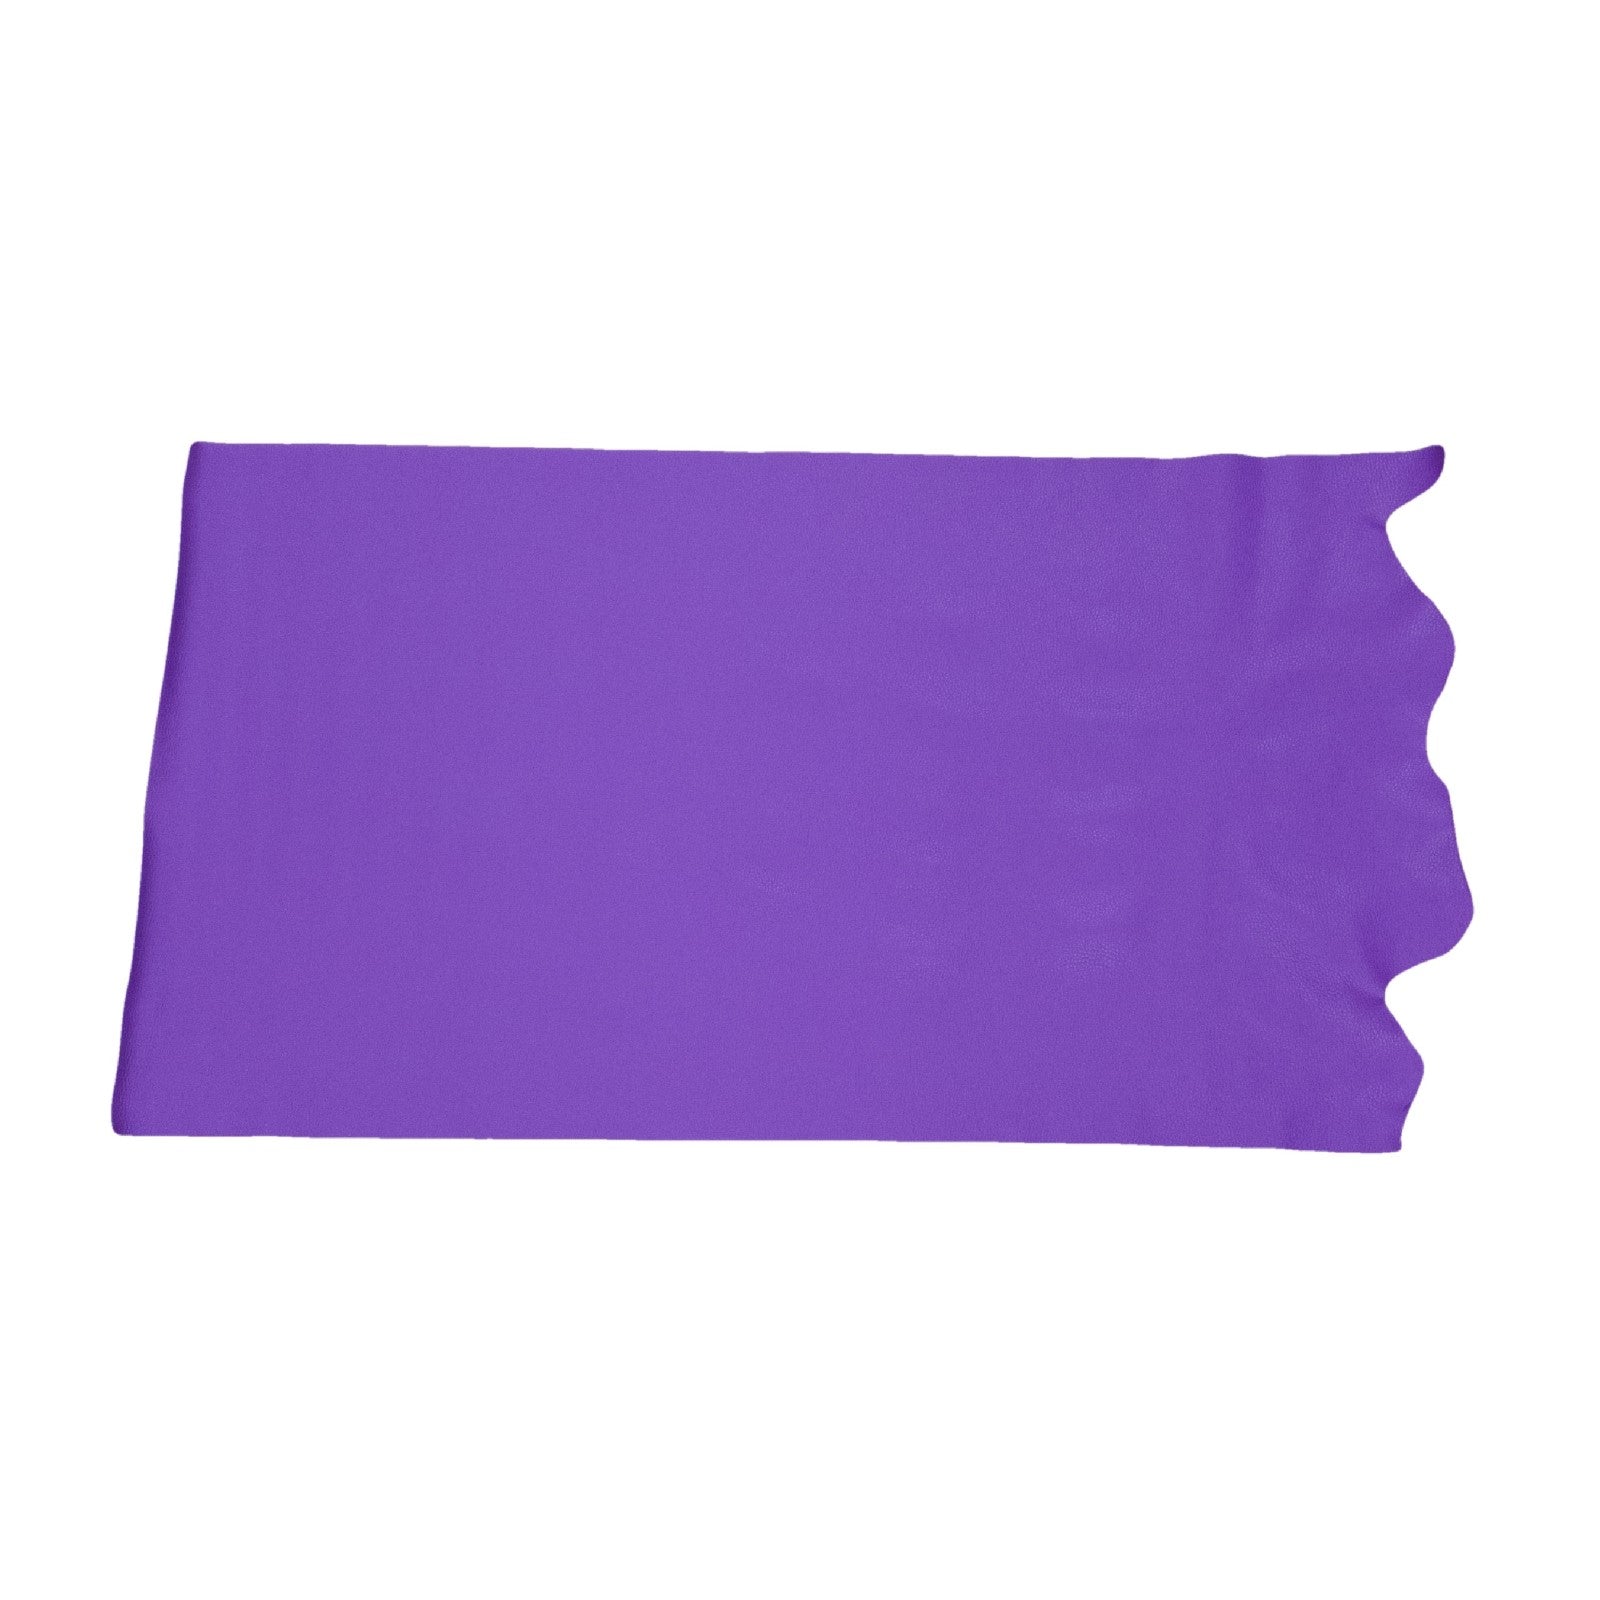 Viking Skol Purple Tried n True 3-4 oz Leather Cow Hides, 6.5-7.5 Sq Ft / Project Piece (Middle) | The Leather Guy